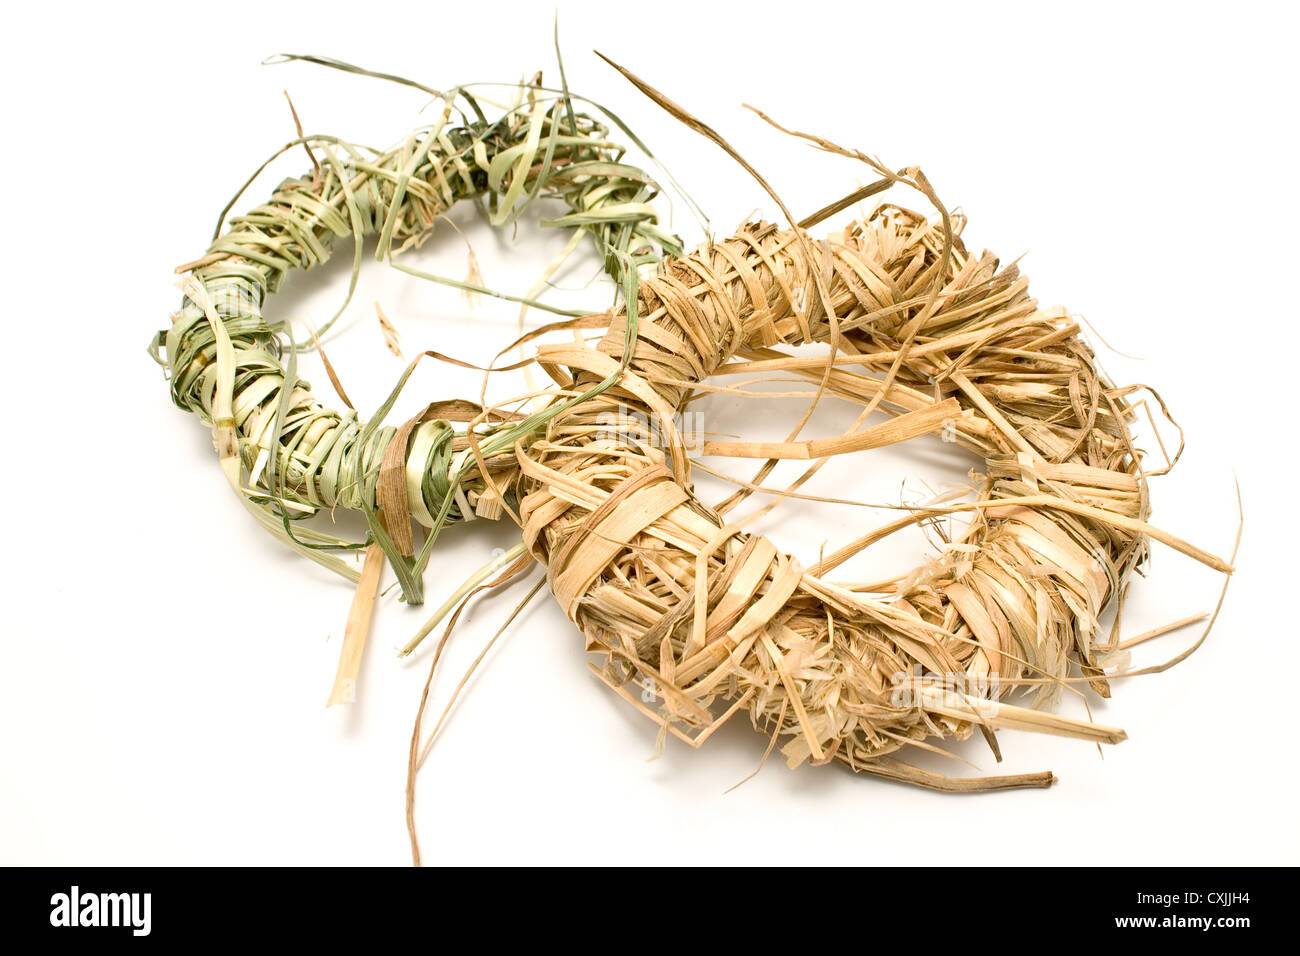 Wreaths made of straw isolated on white Stock Photo